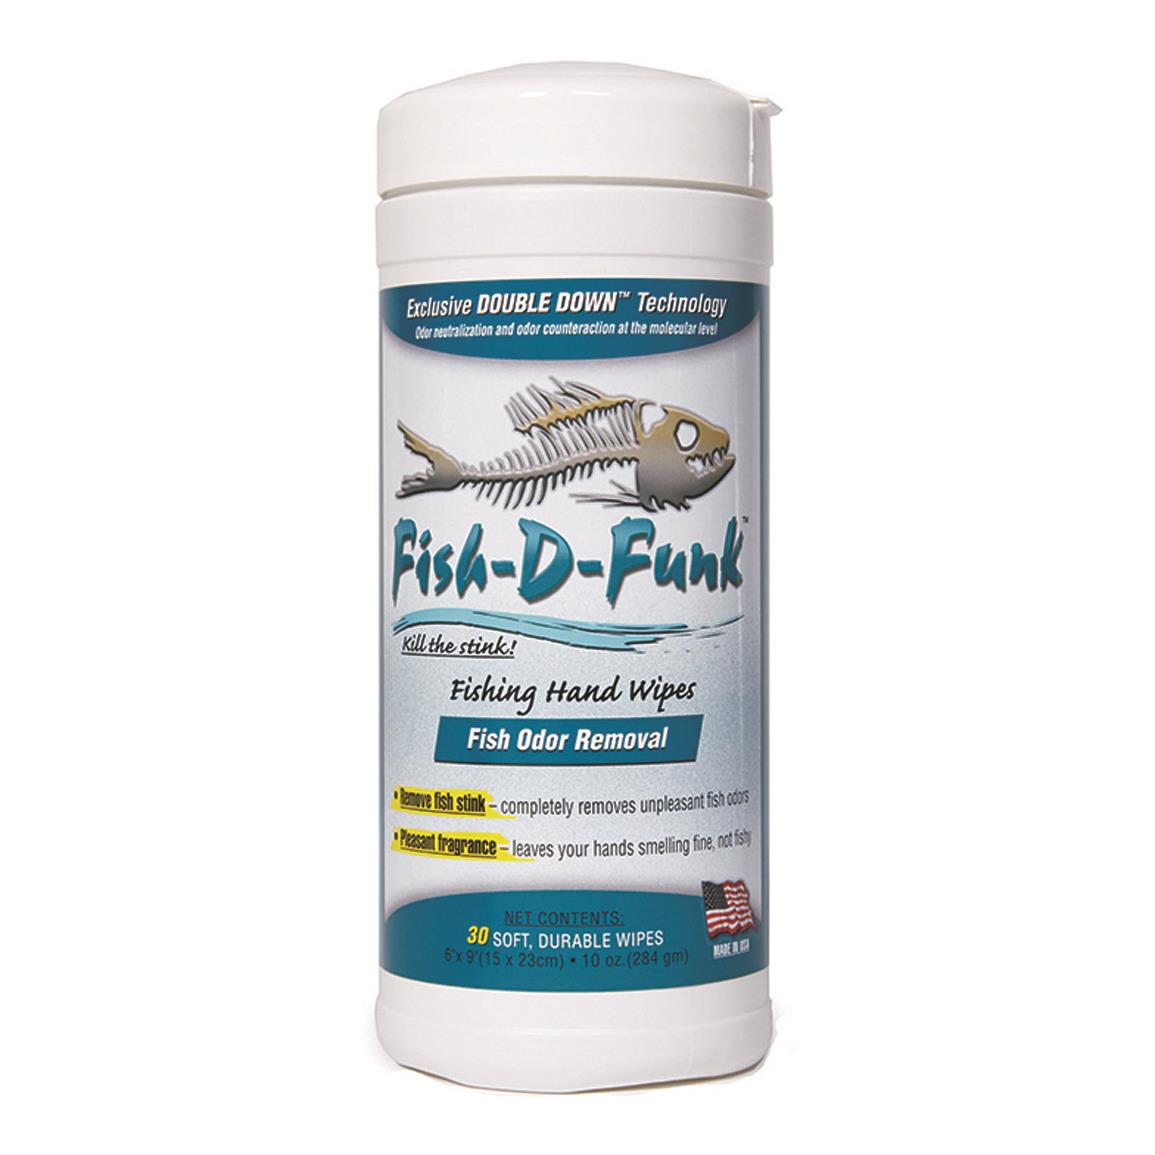 Fish-D-Funk Fish Odor Removal Hand Wipes